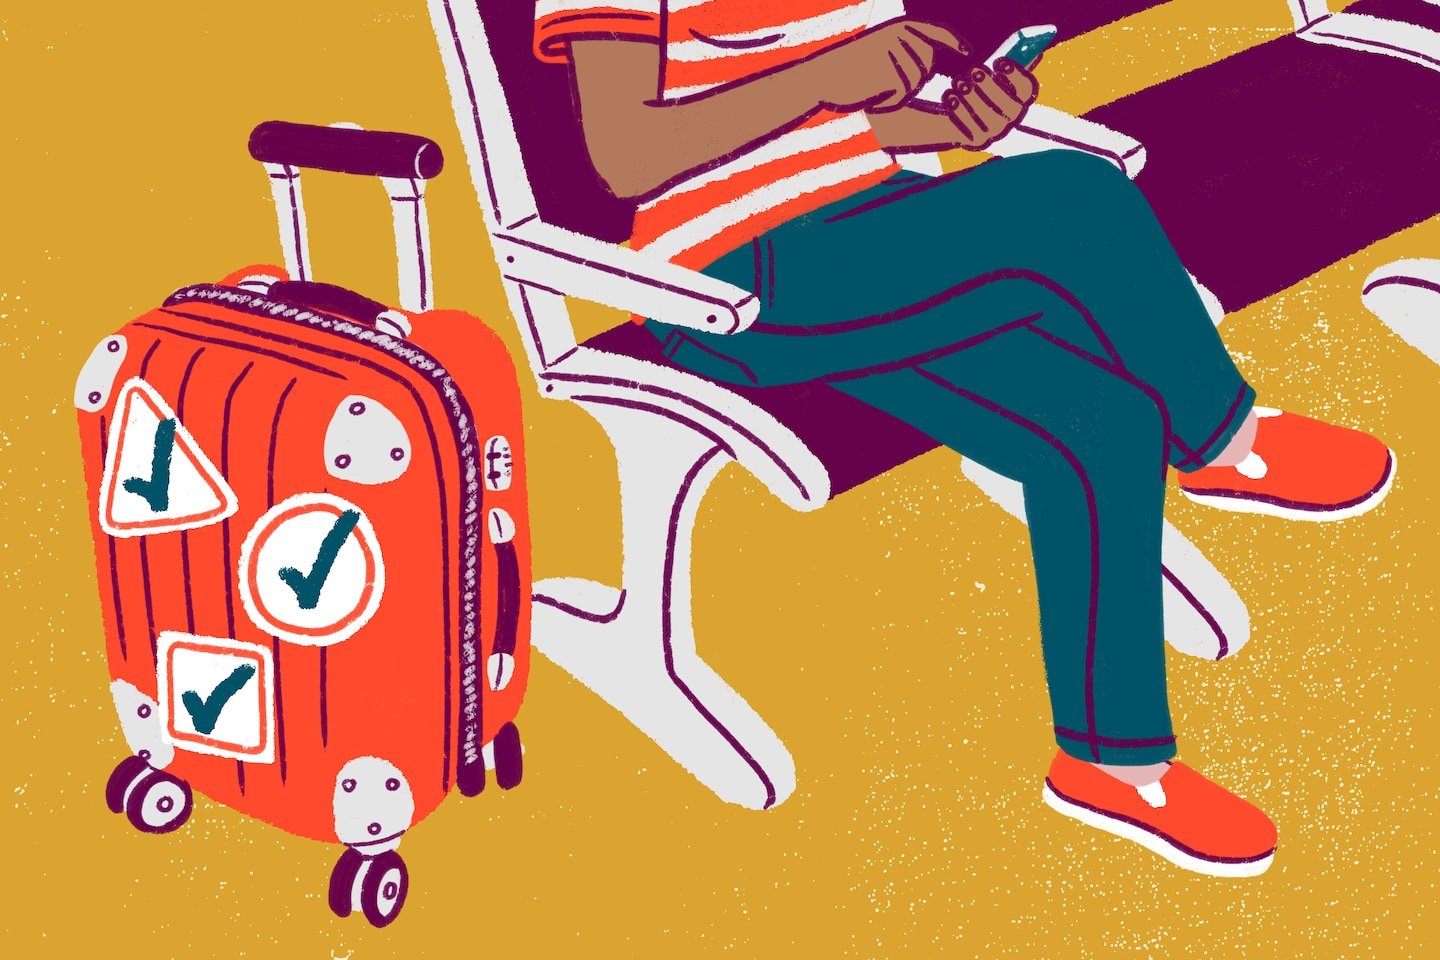 Thinking about a remote-work trip? Consider these tips first.